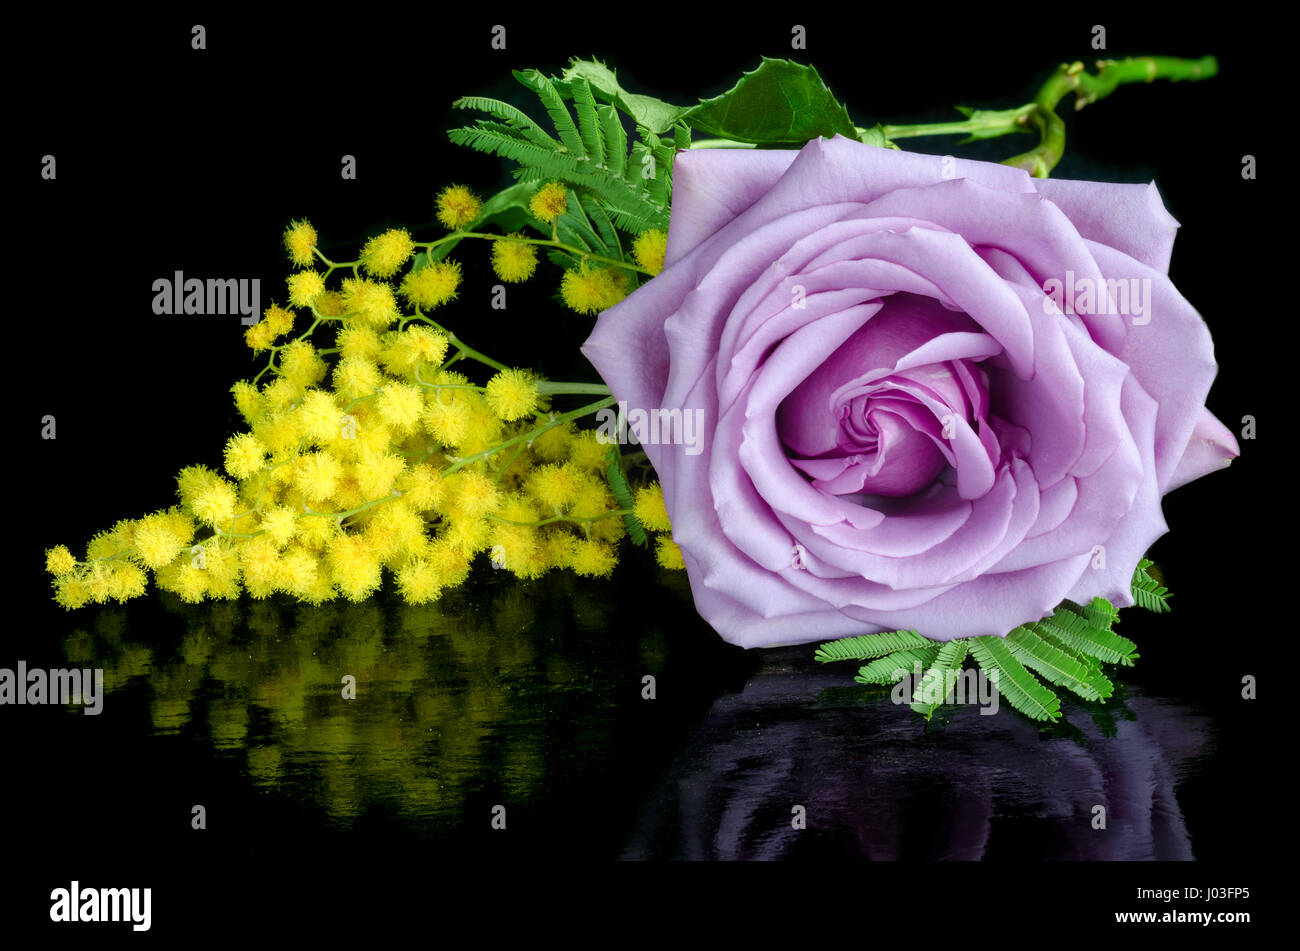 Flowers are on a black background with reflection Stock Photo